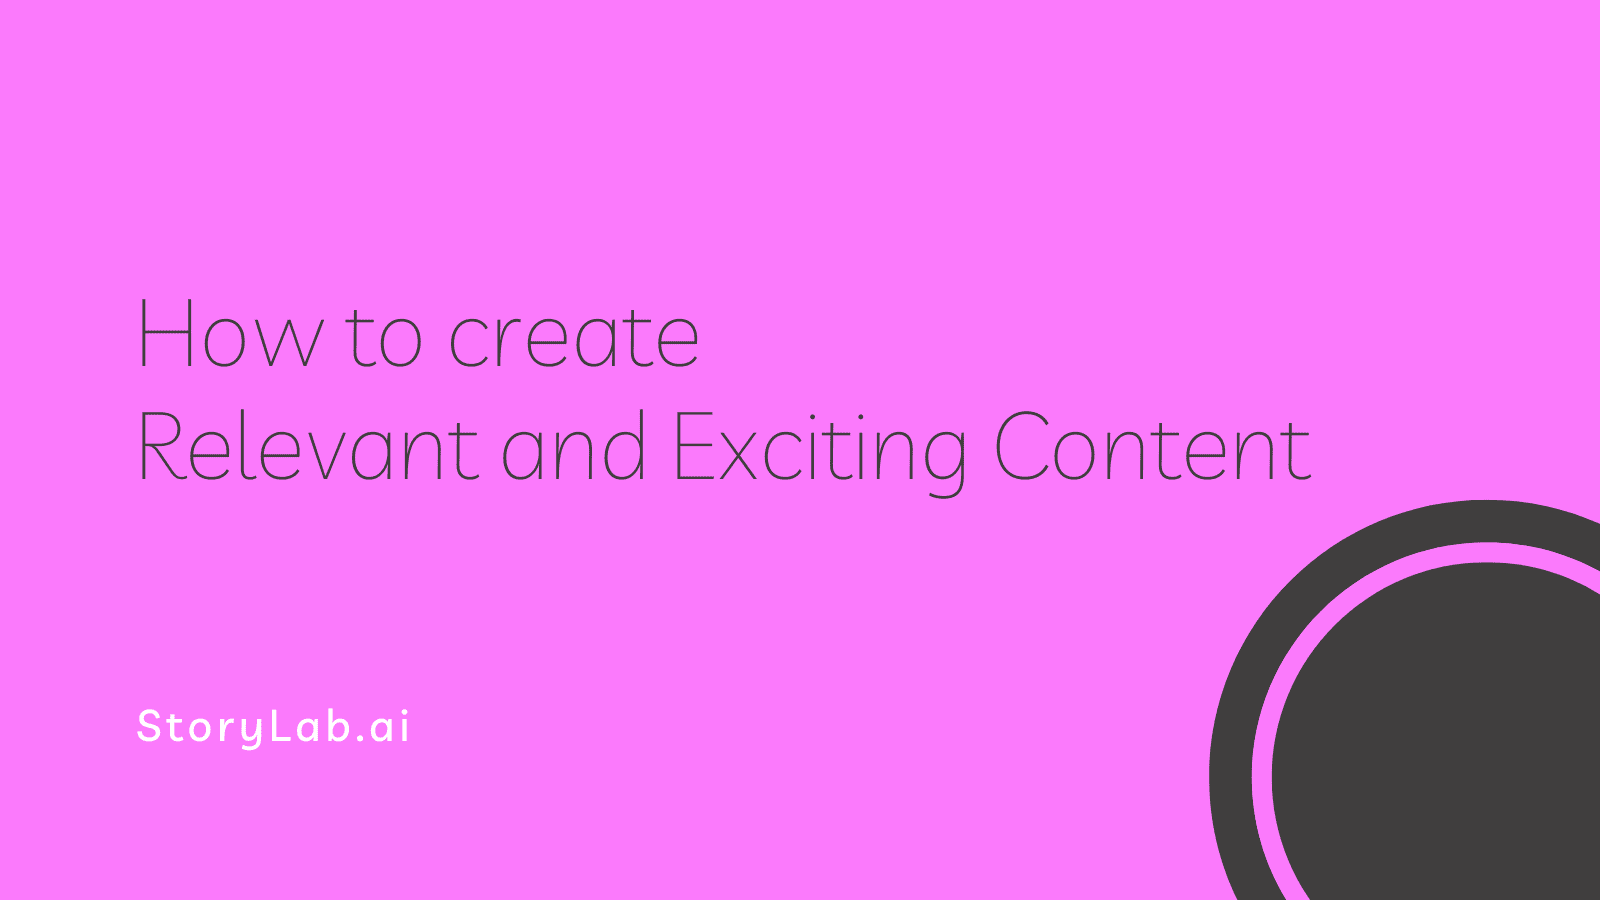 How to create Relevant and Exciting Content